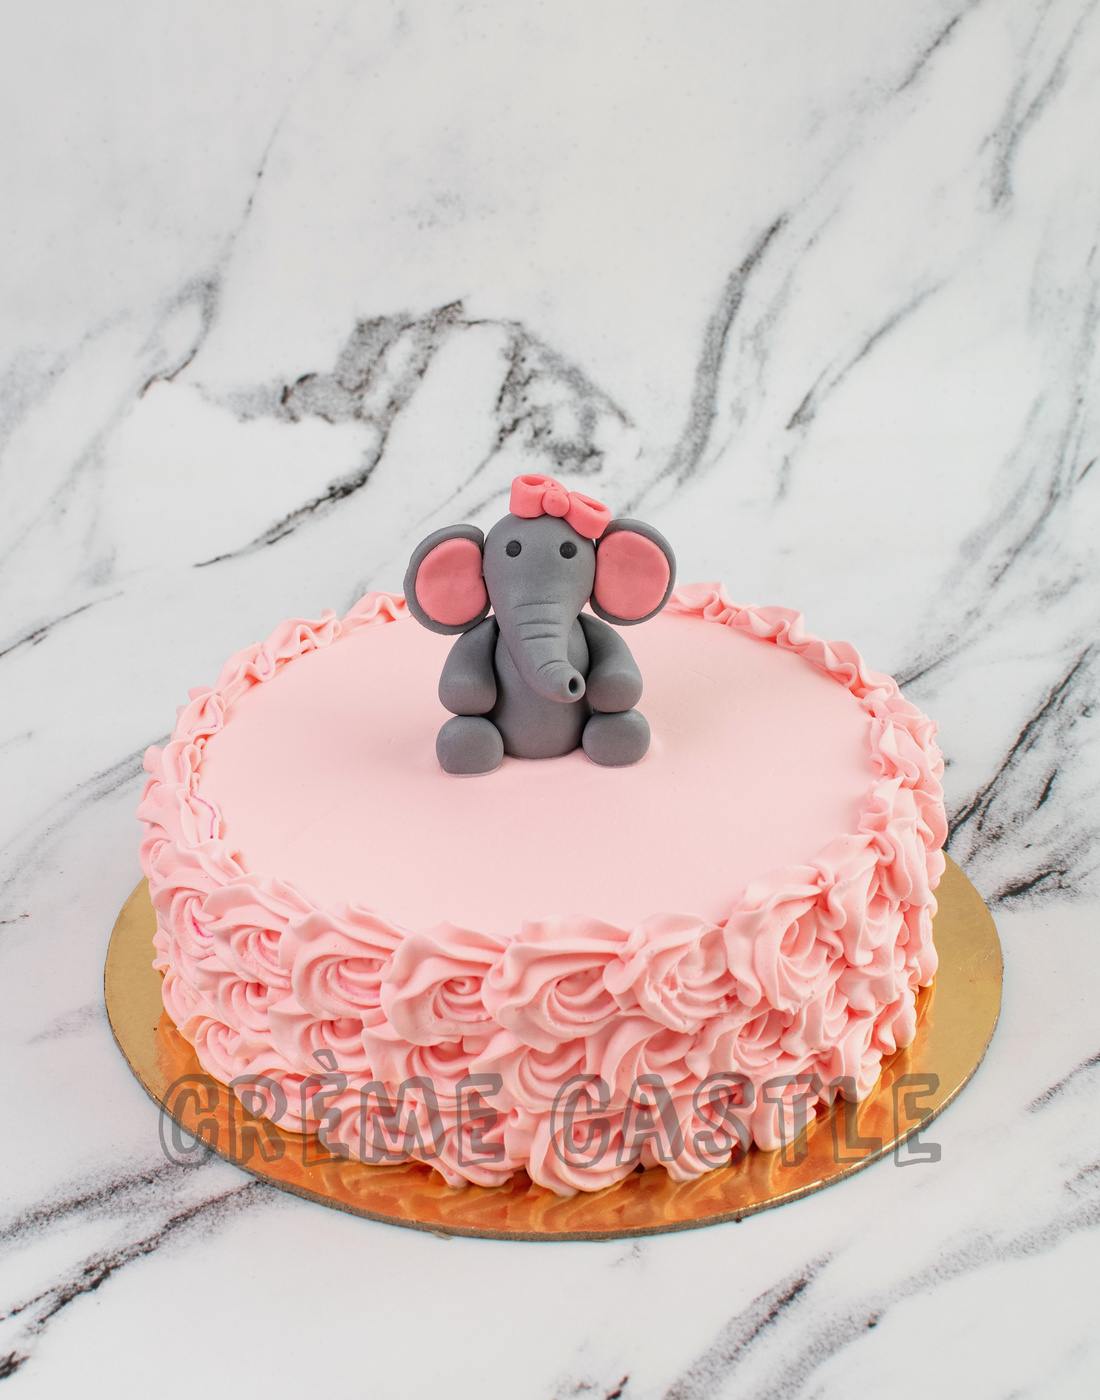 Elephant Baby Shower Cake Topper Made From Fondant, Sugar Elephant in the  Wooden Tub Birthday Cake Topper, Edible Elephant, Elephant Topper - Etsy